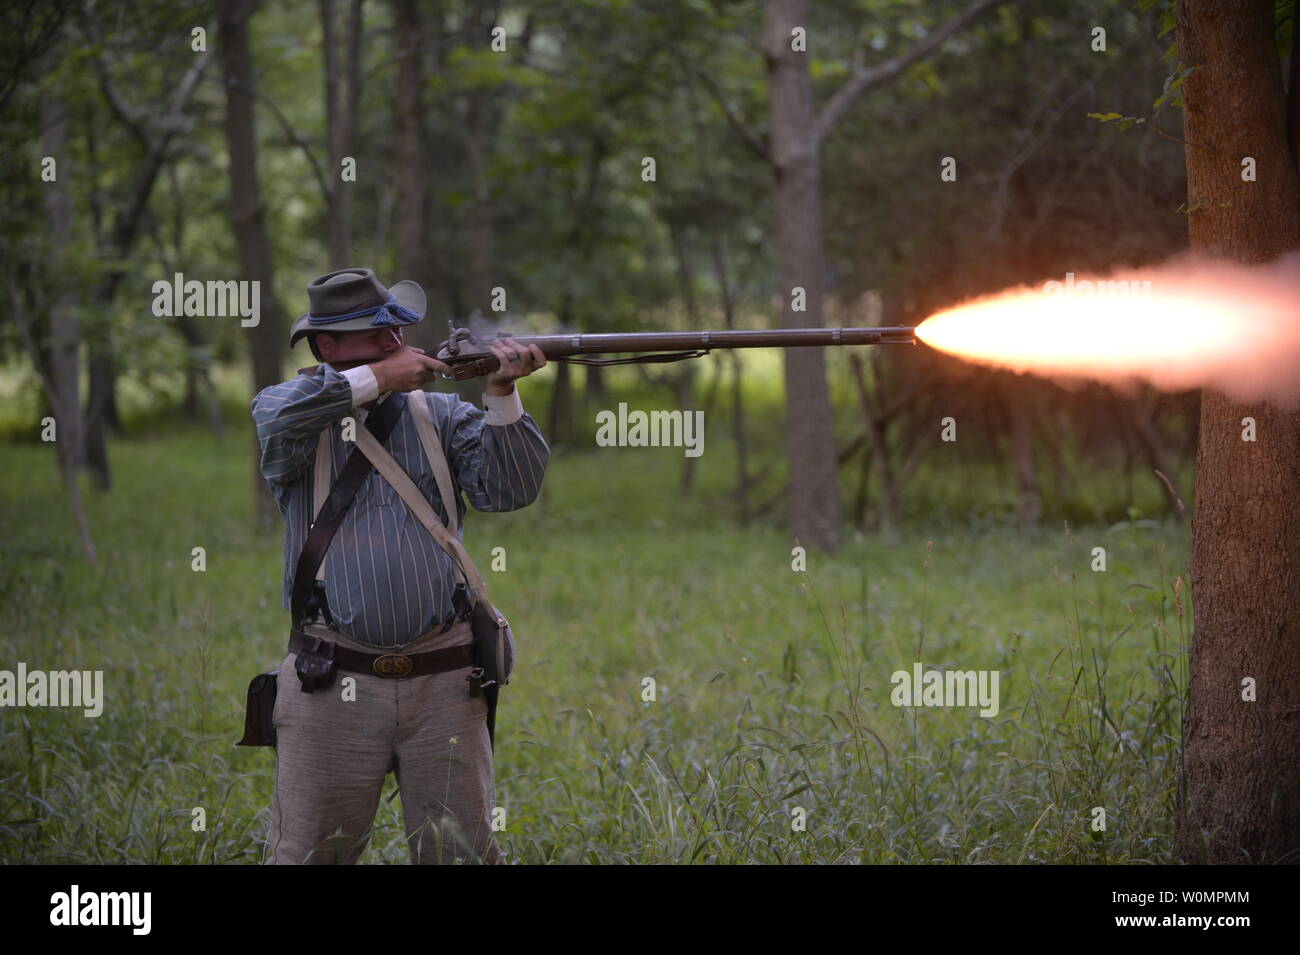 Steve Brown, an Air Force and Army combat veteran, fires his rifle during the 153rd anniversary of the Battle of Battle of Gettysburg on July 3, 2016. Brown served as a Technical Sergeant in the Air Force Security Forces before joining the Army and earning a commission. During that time, Brown was wounded twice in combat, ultimately losing all feeling in one leg. Photo by Christopher S. Muncy/U.S. Air National Guard/UPI Stock Photo